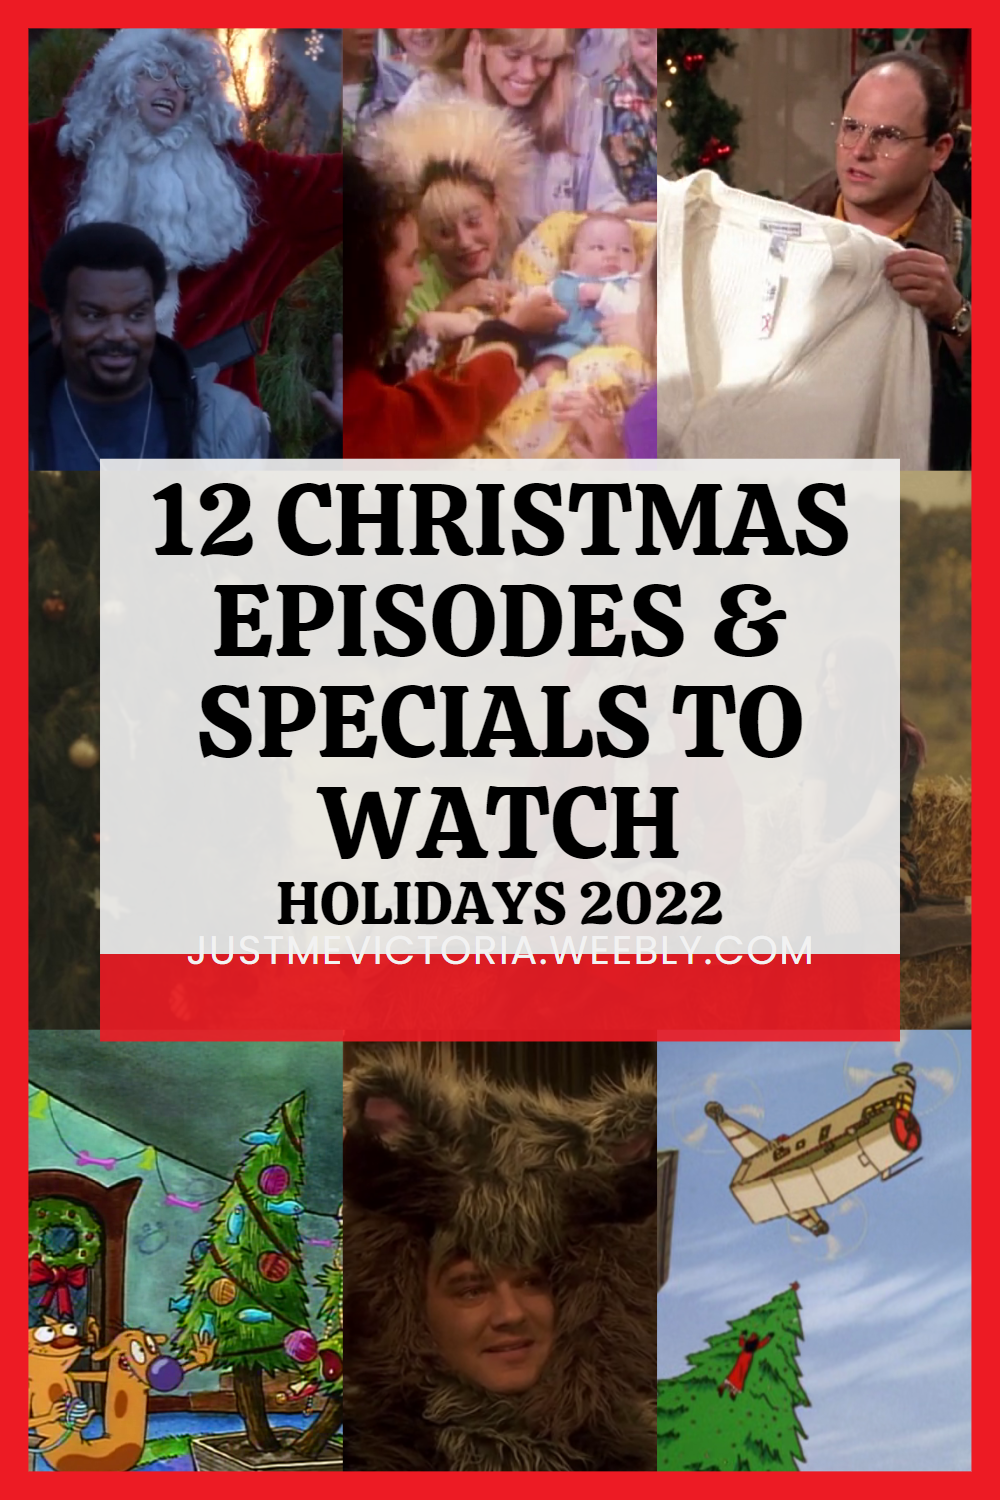 12 Christmas Episodes & Specials To Watch | Holidays 2022